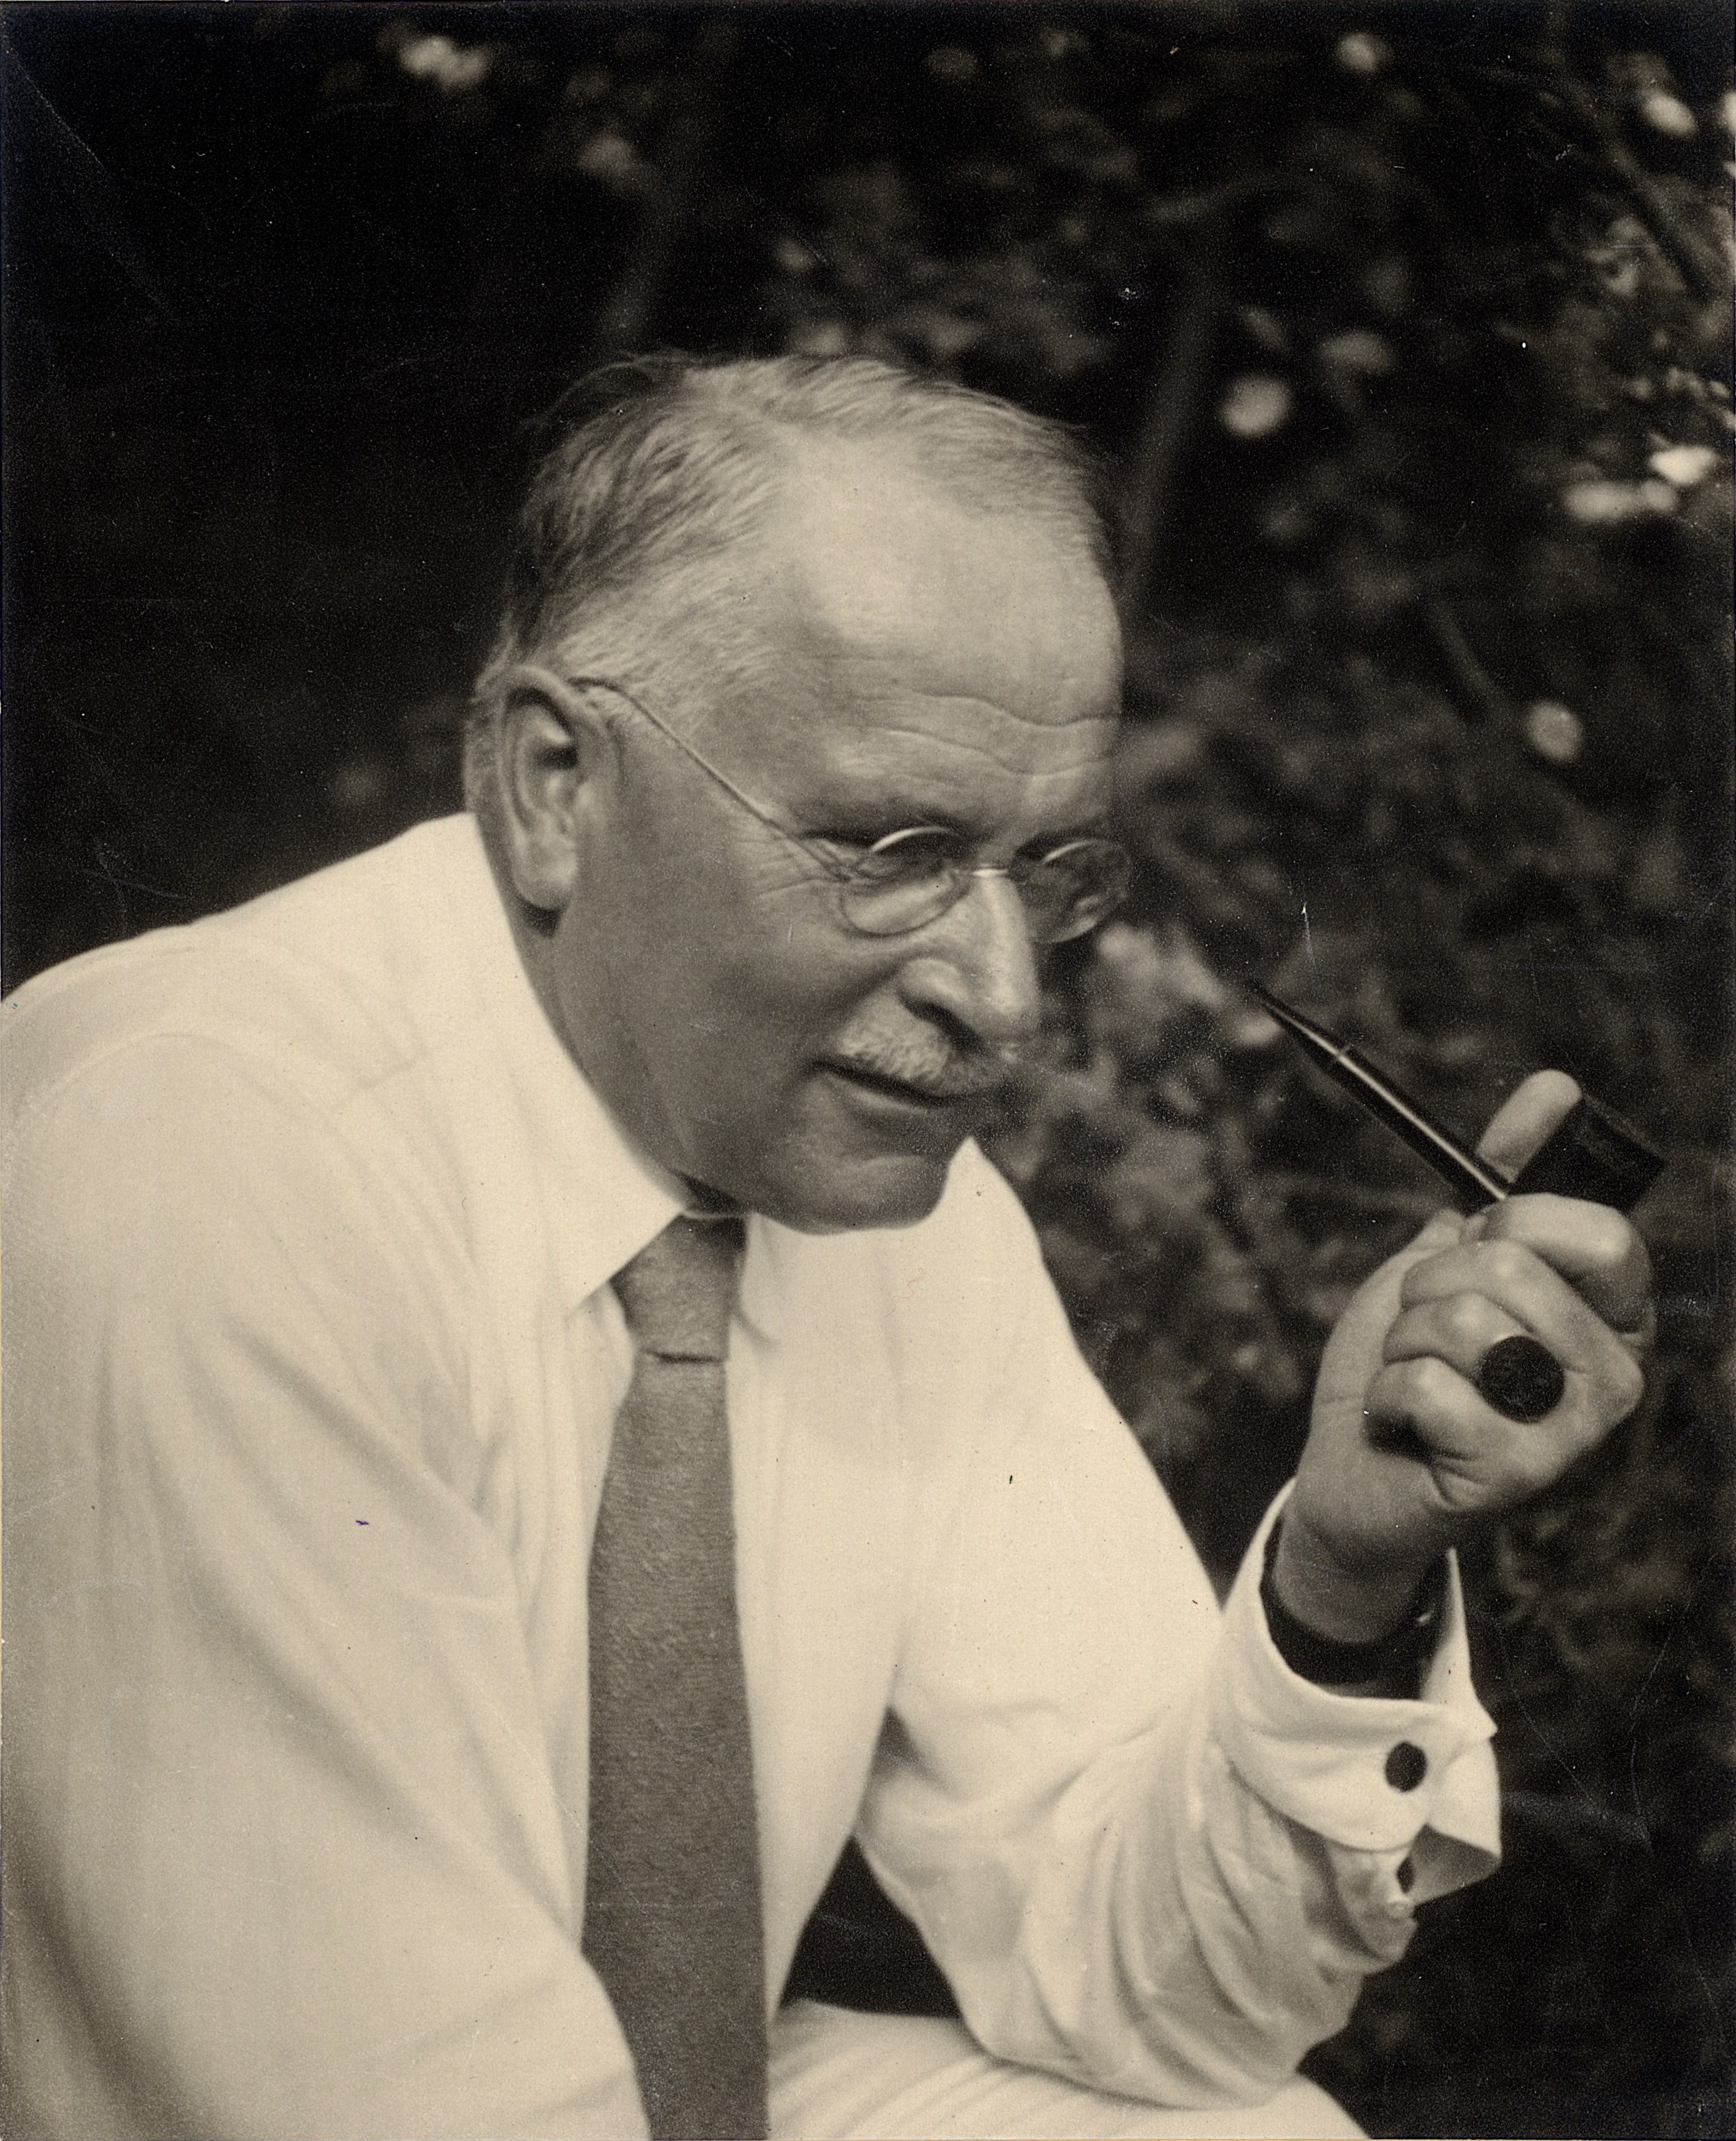 a man in a white shirt and tie embodying Carl Jung while smoking a pipe.